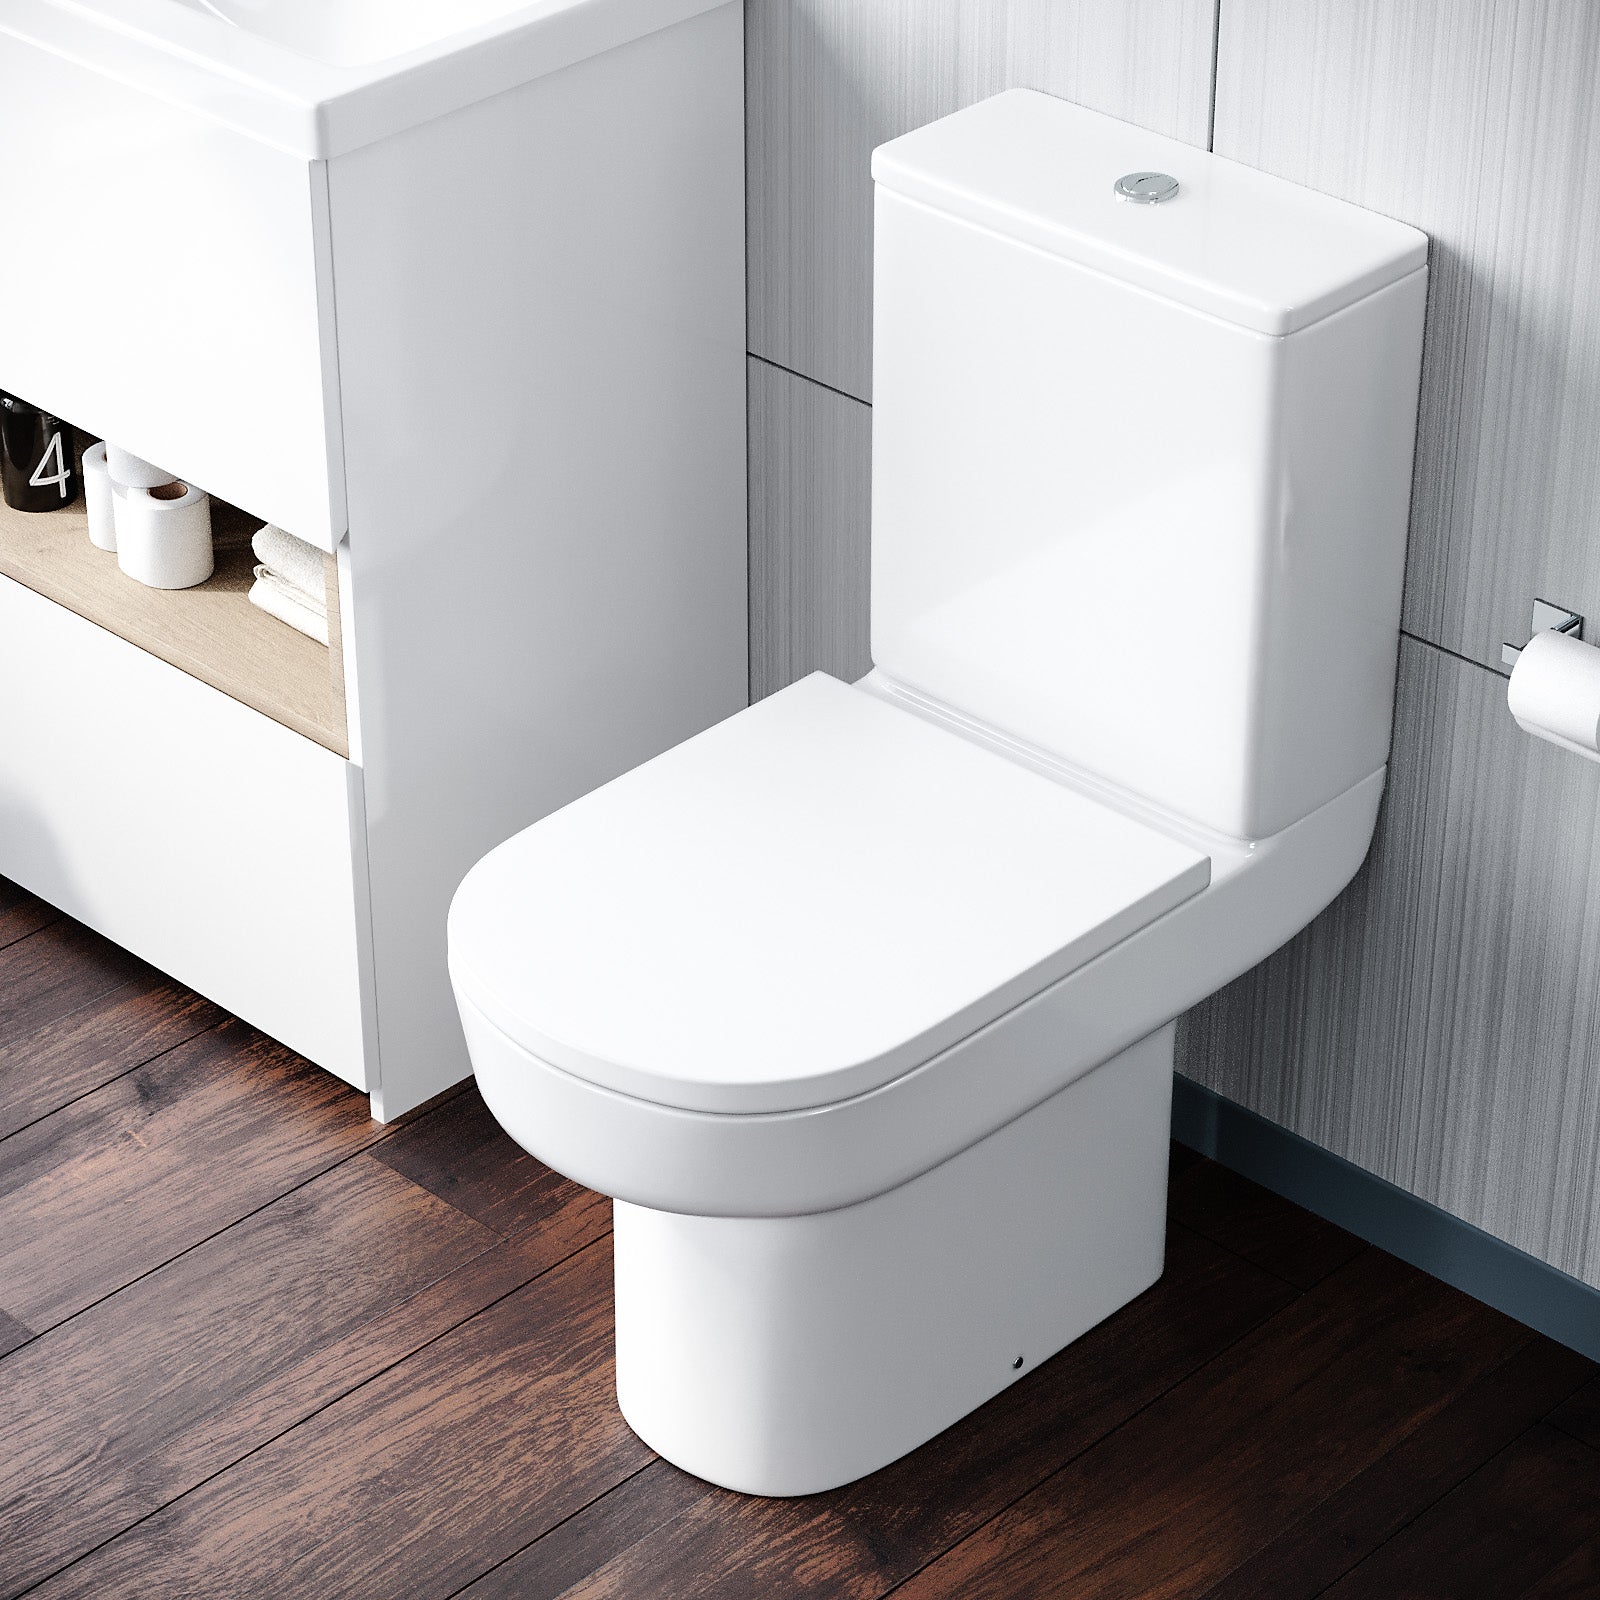 Anna Stylish Round Rimless Close Coupled Toilet With Soft Close Seat